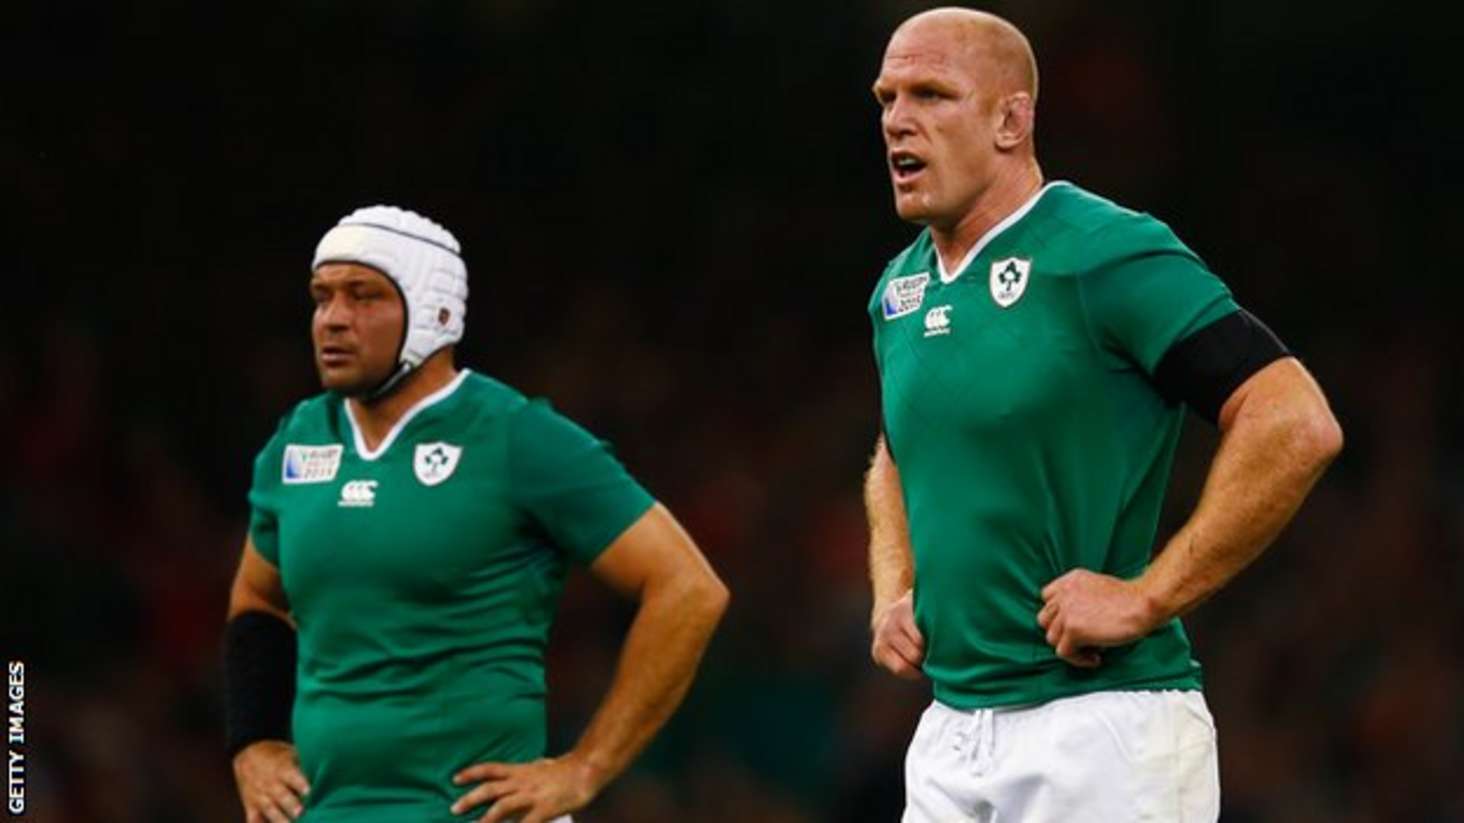 Rory Best and Paul O'Connell